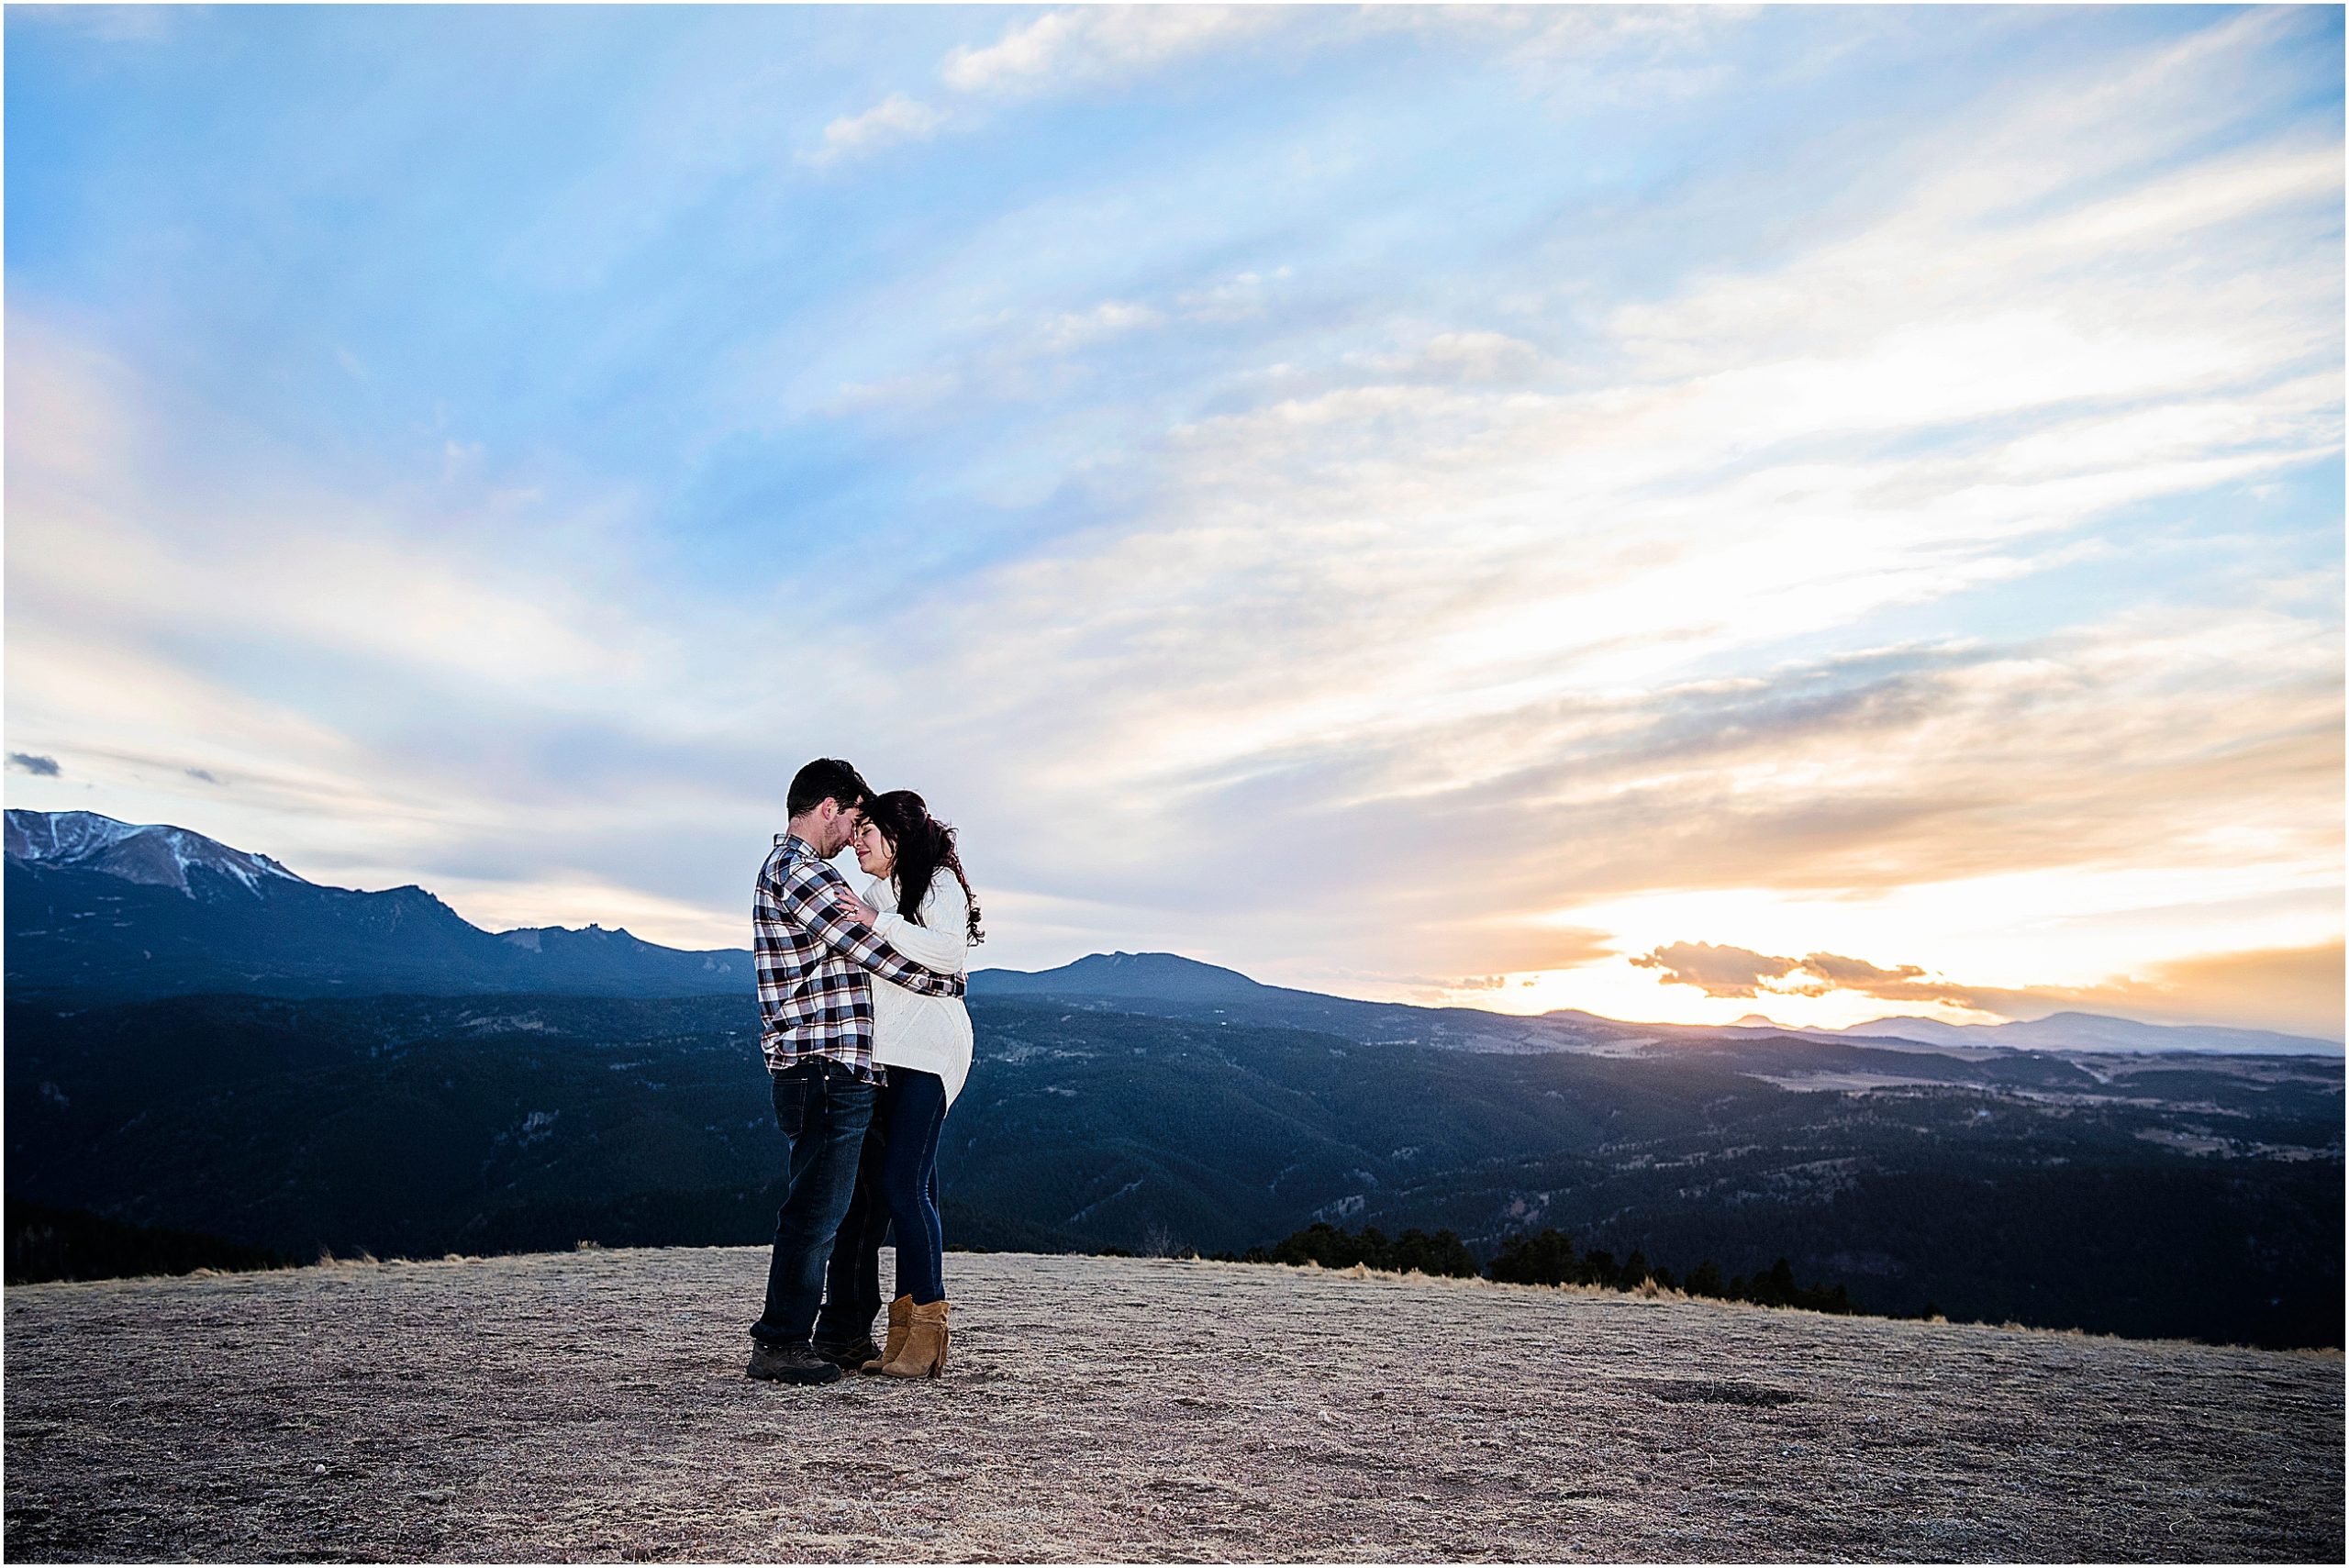 couple in love in the colorado rocky mountains at sunset in winter.